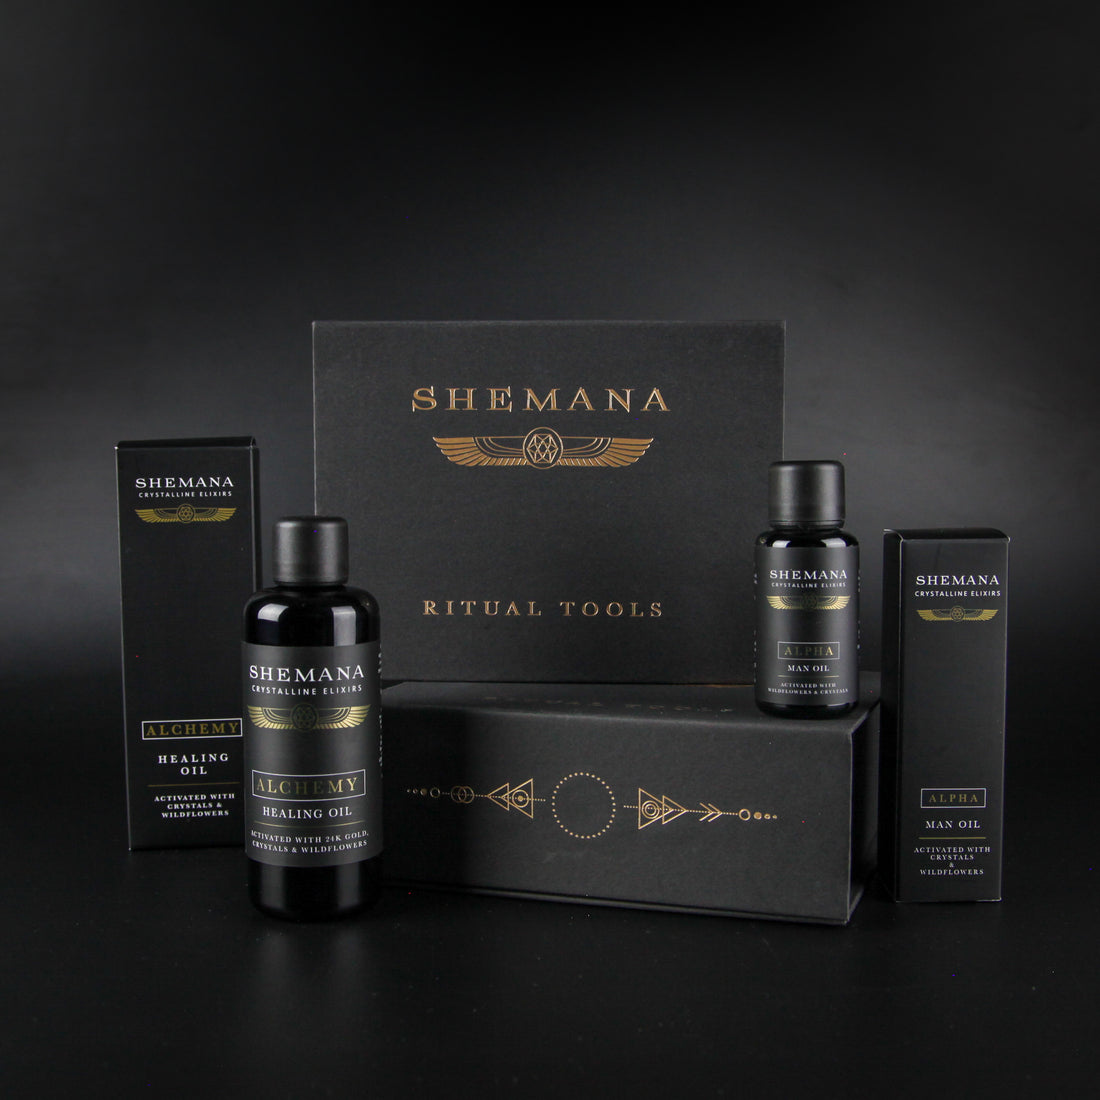 body face and beard oil in miron glass black gift box with Shemana logo 